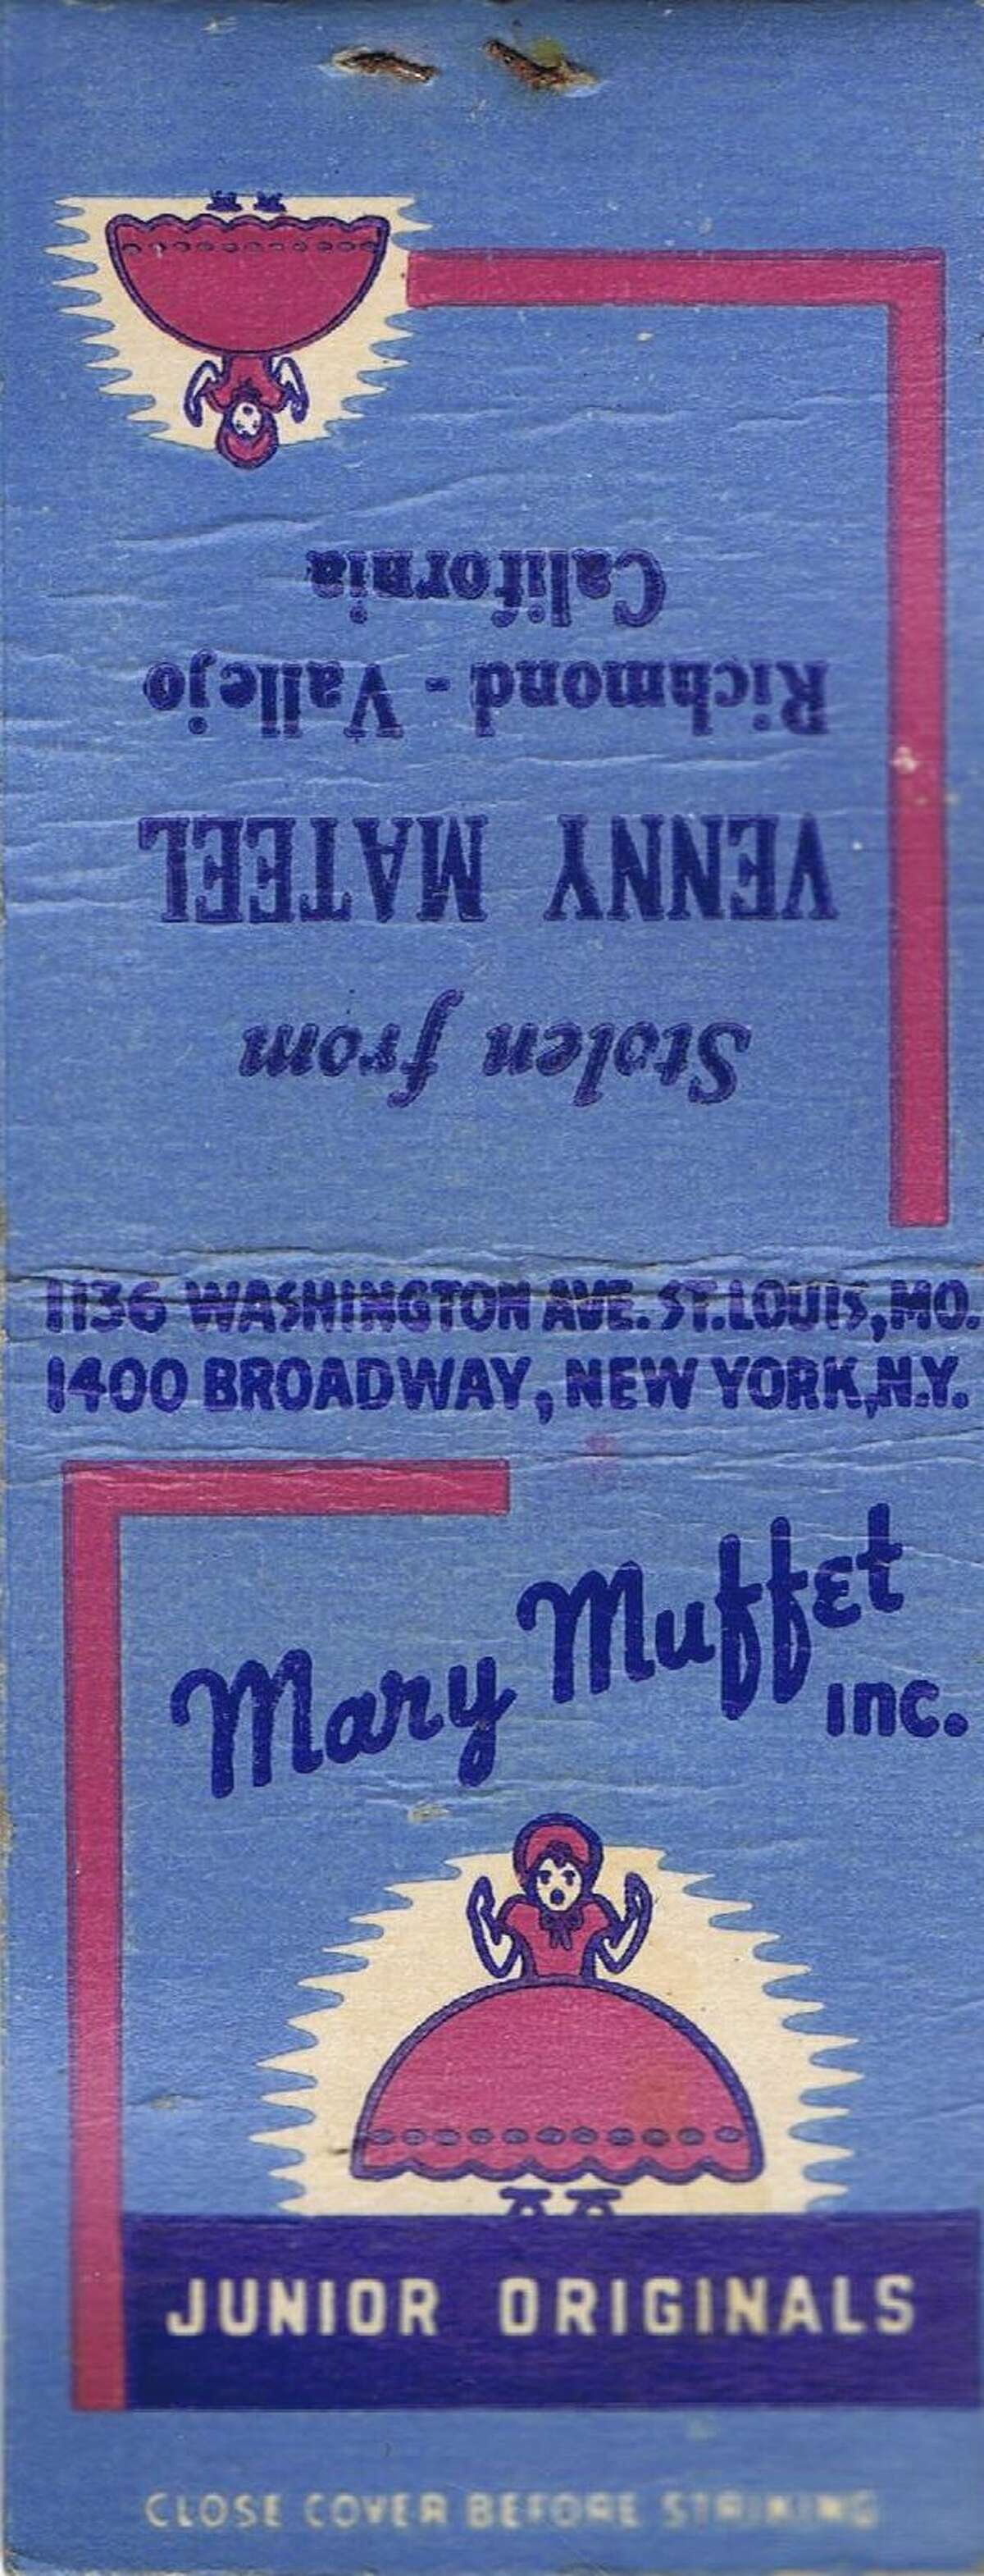 Colorful look at San Francisco Bay Area through 1930s and 40s matchbooks